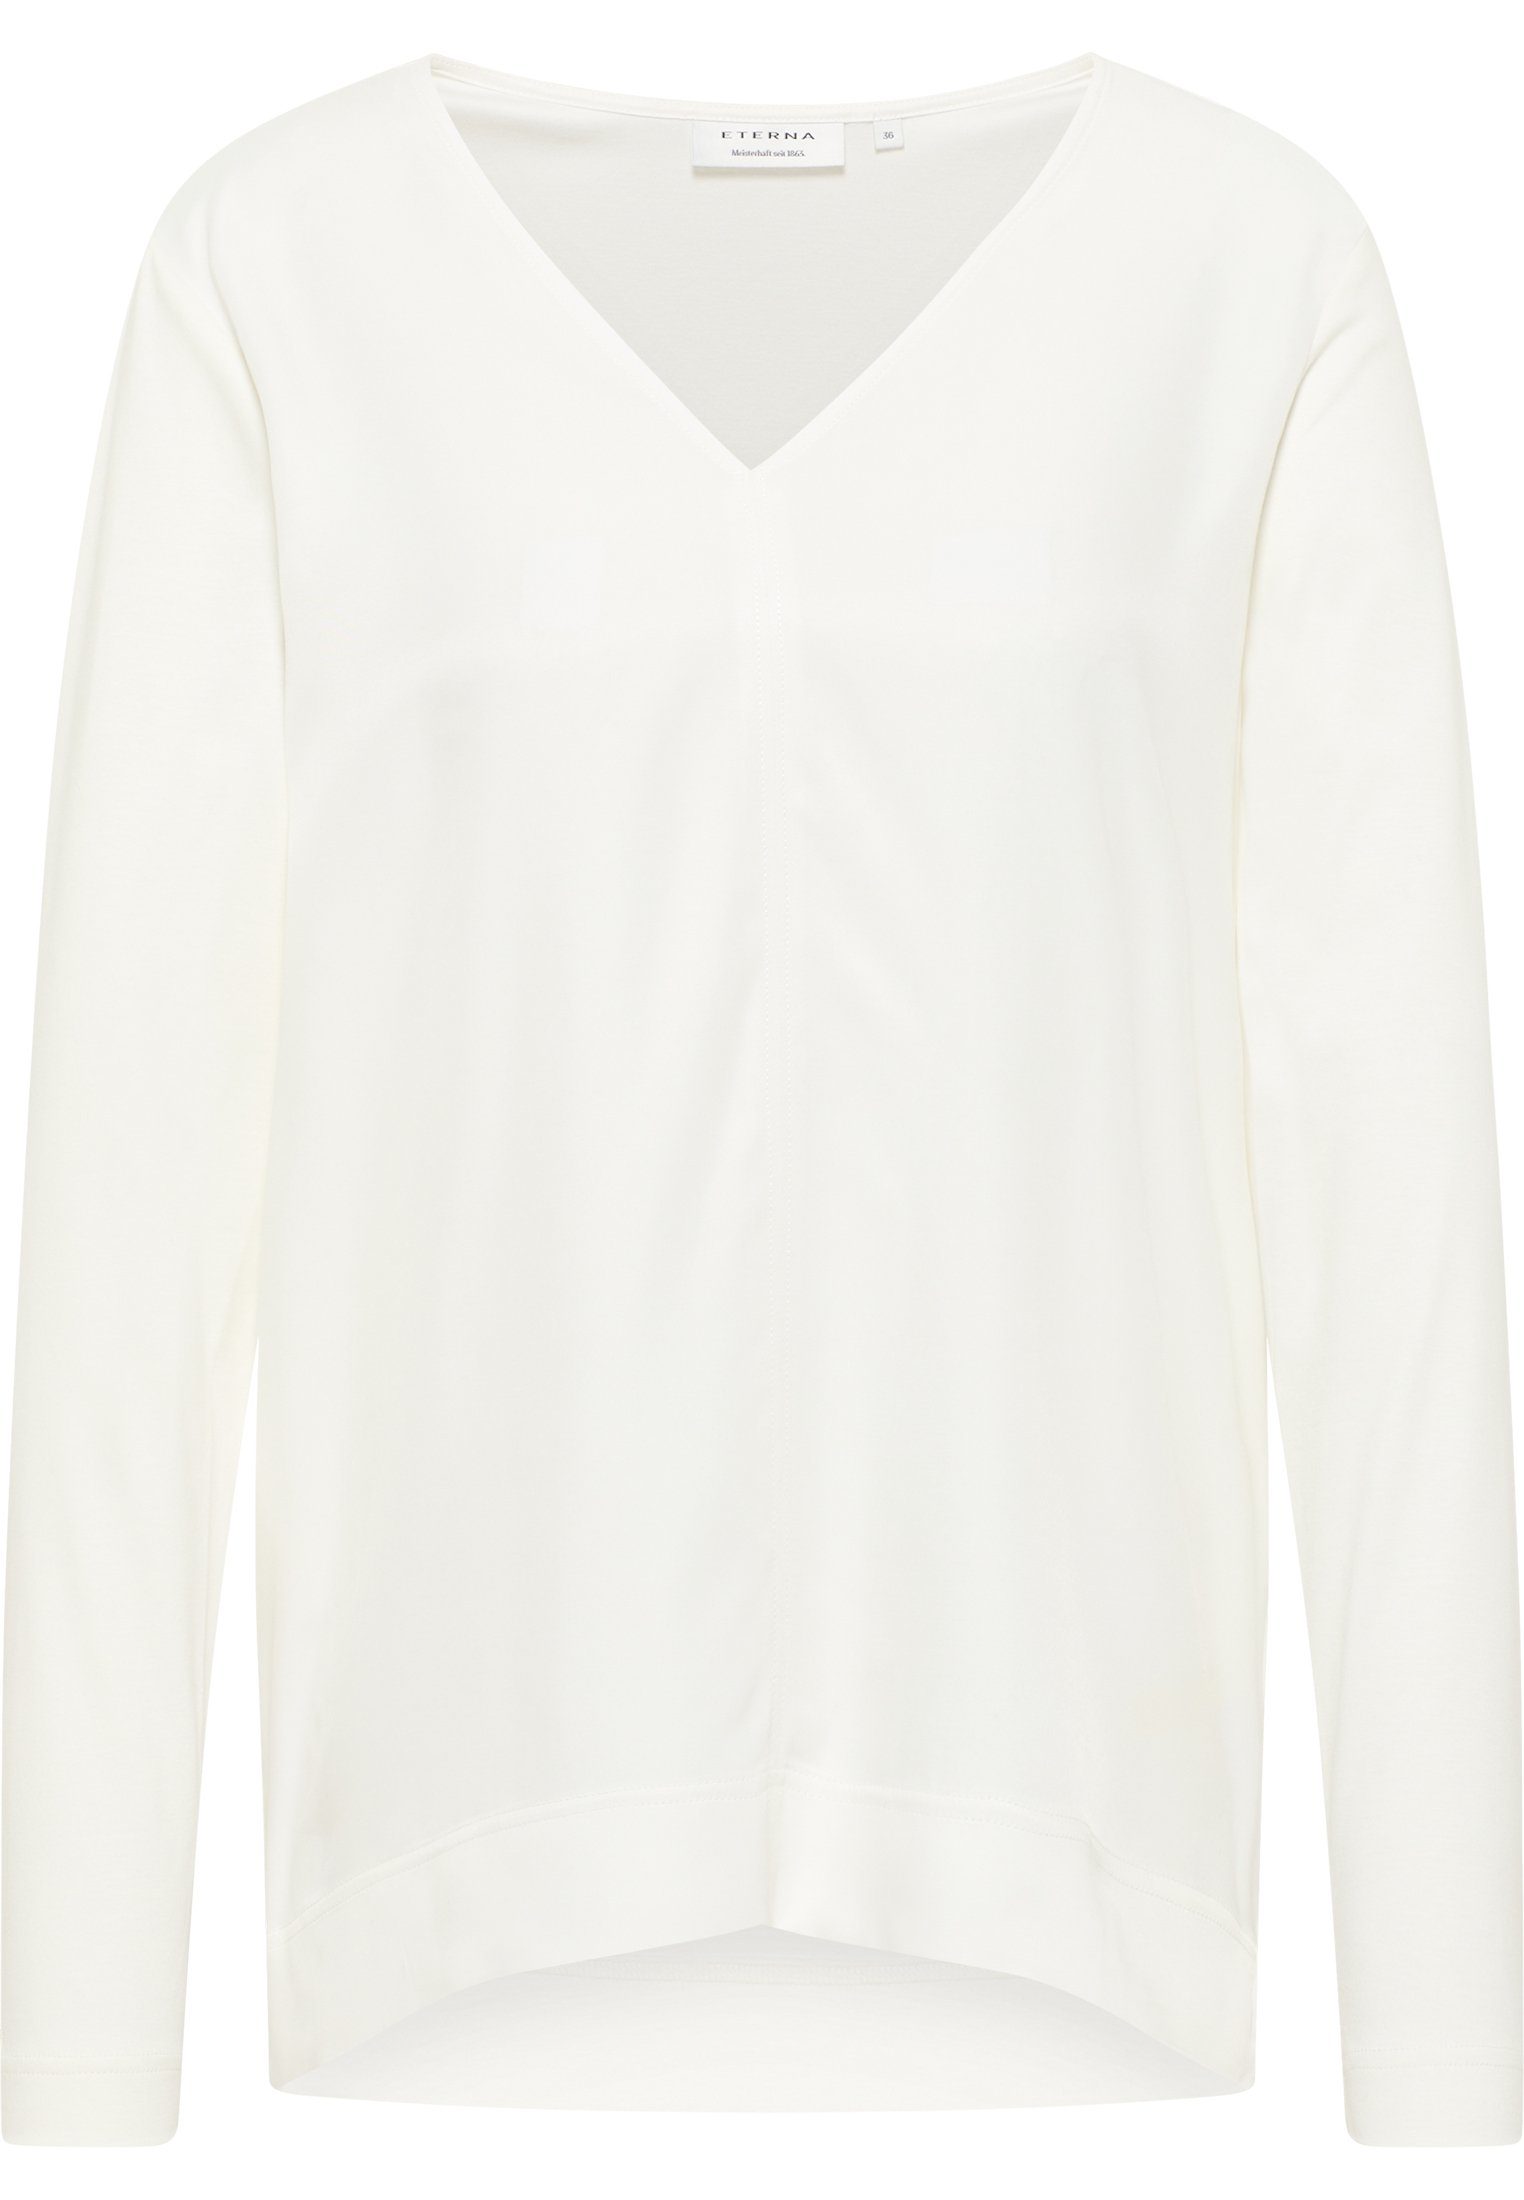 Eterna Shirtbluse LOOSE FIT off-white